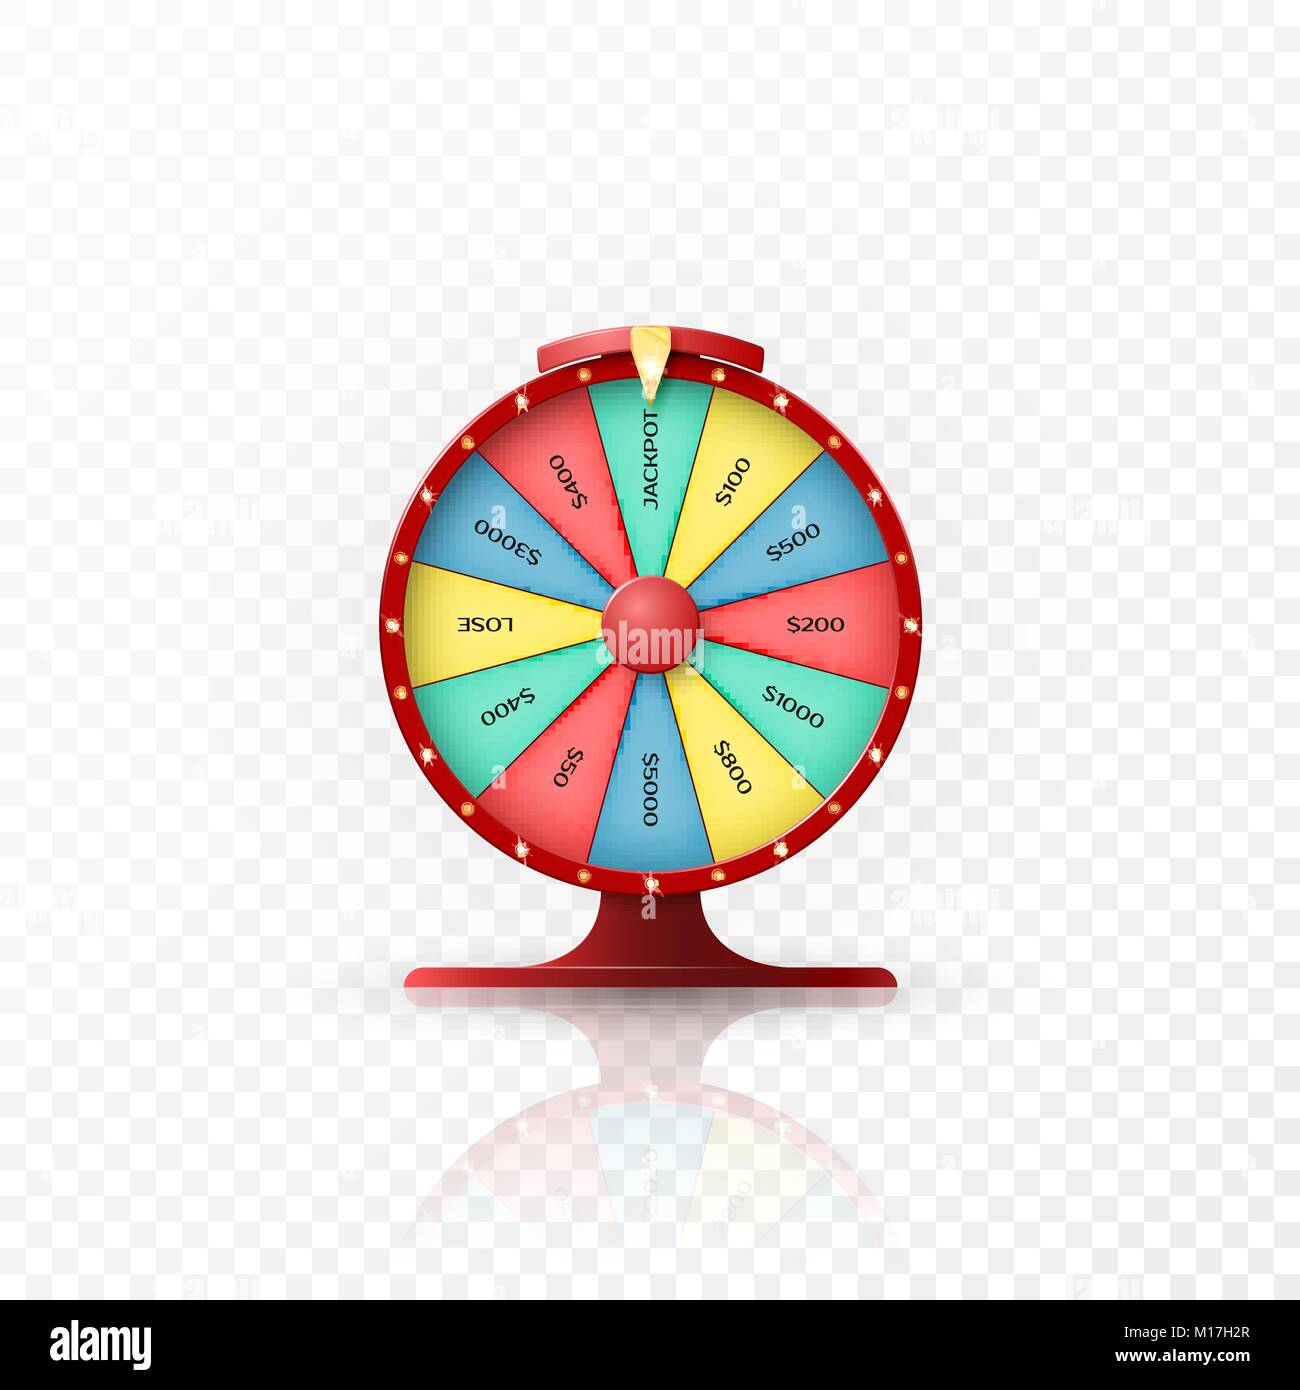 Jackpot win in the wheel of fortune. Wheel of fortune isolated on transparent background. Vector illustration Stock Vector